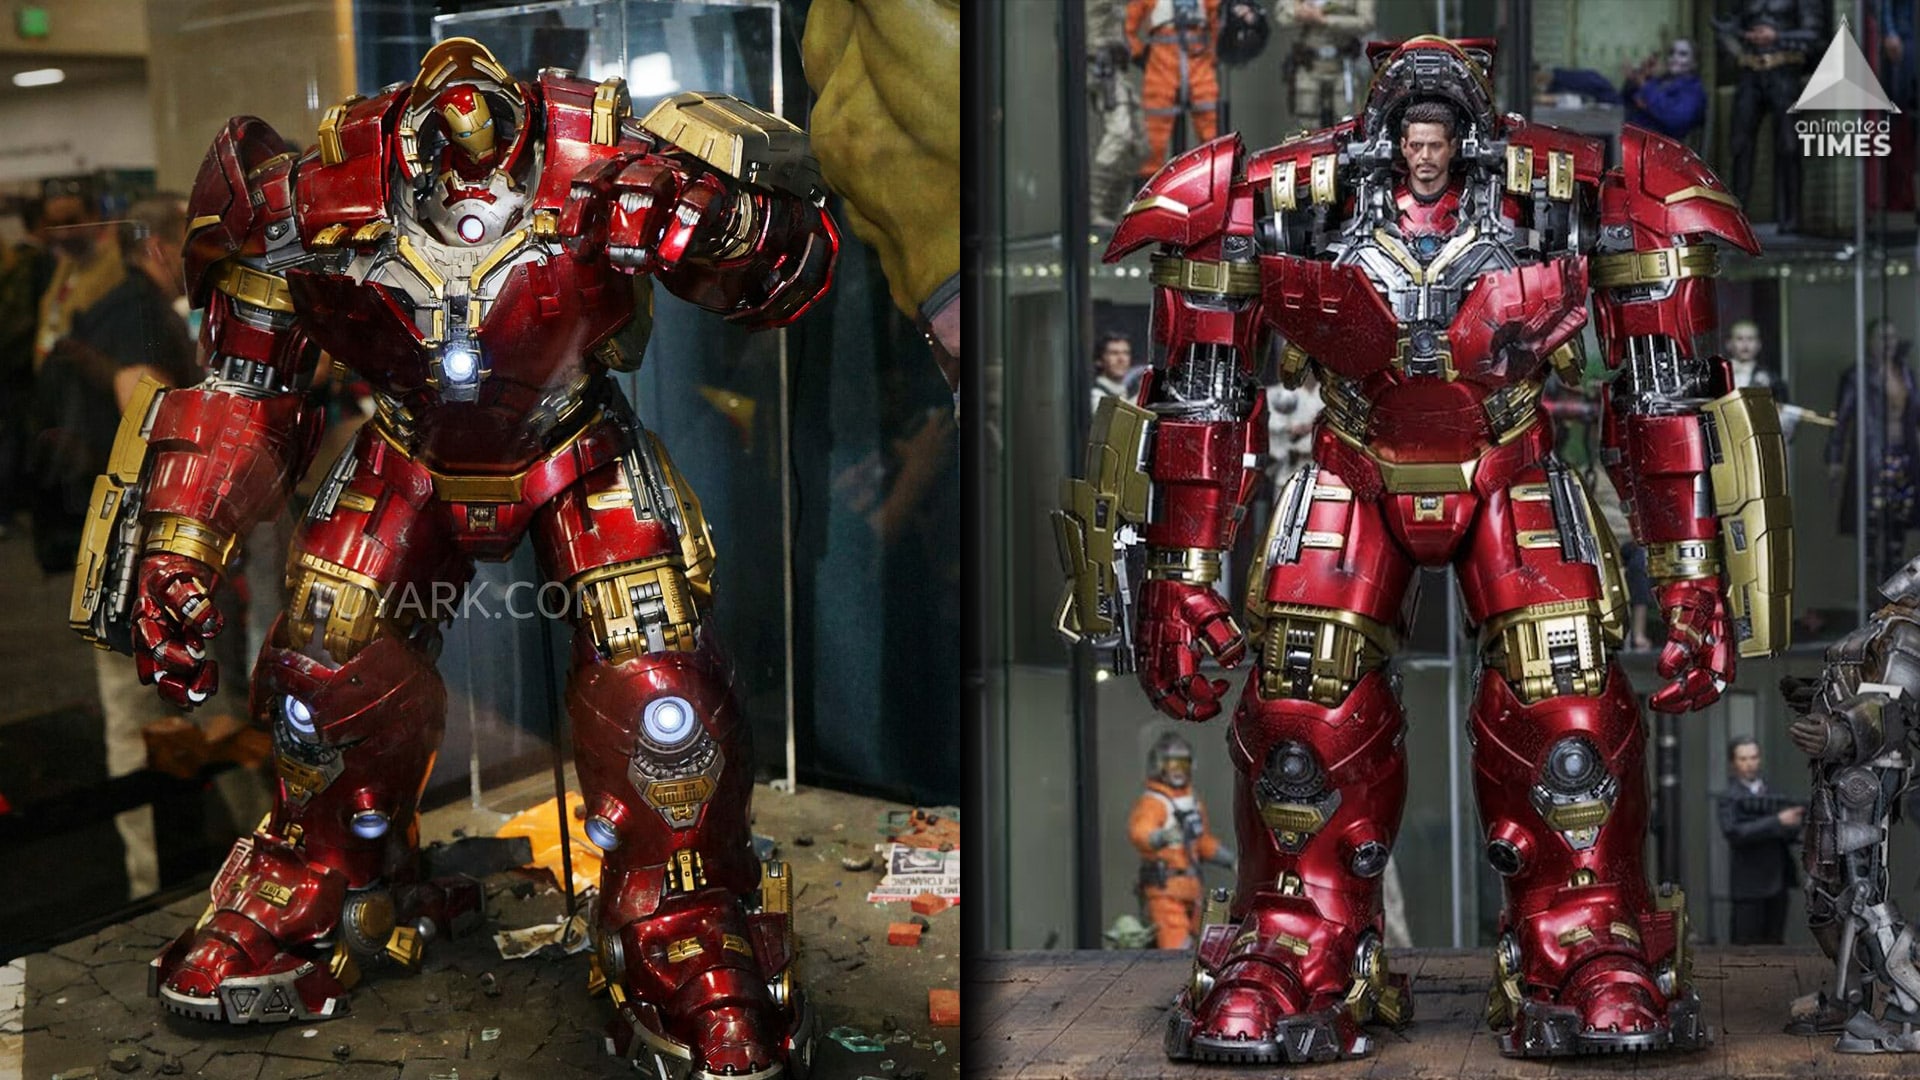 Marvel’s Epic $800 Hulkbuster Toy Is The Coolest Collectible Ever